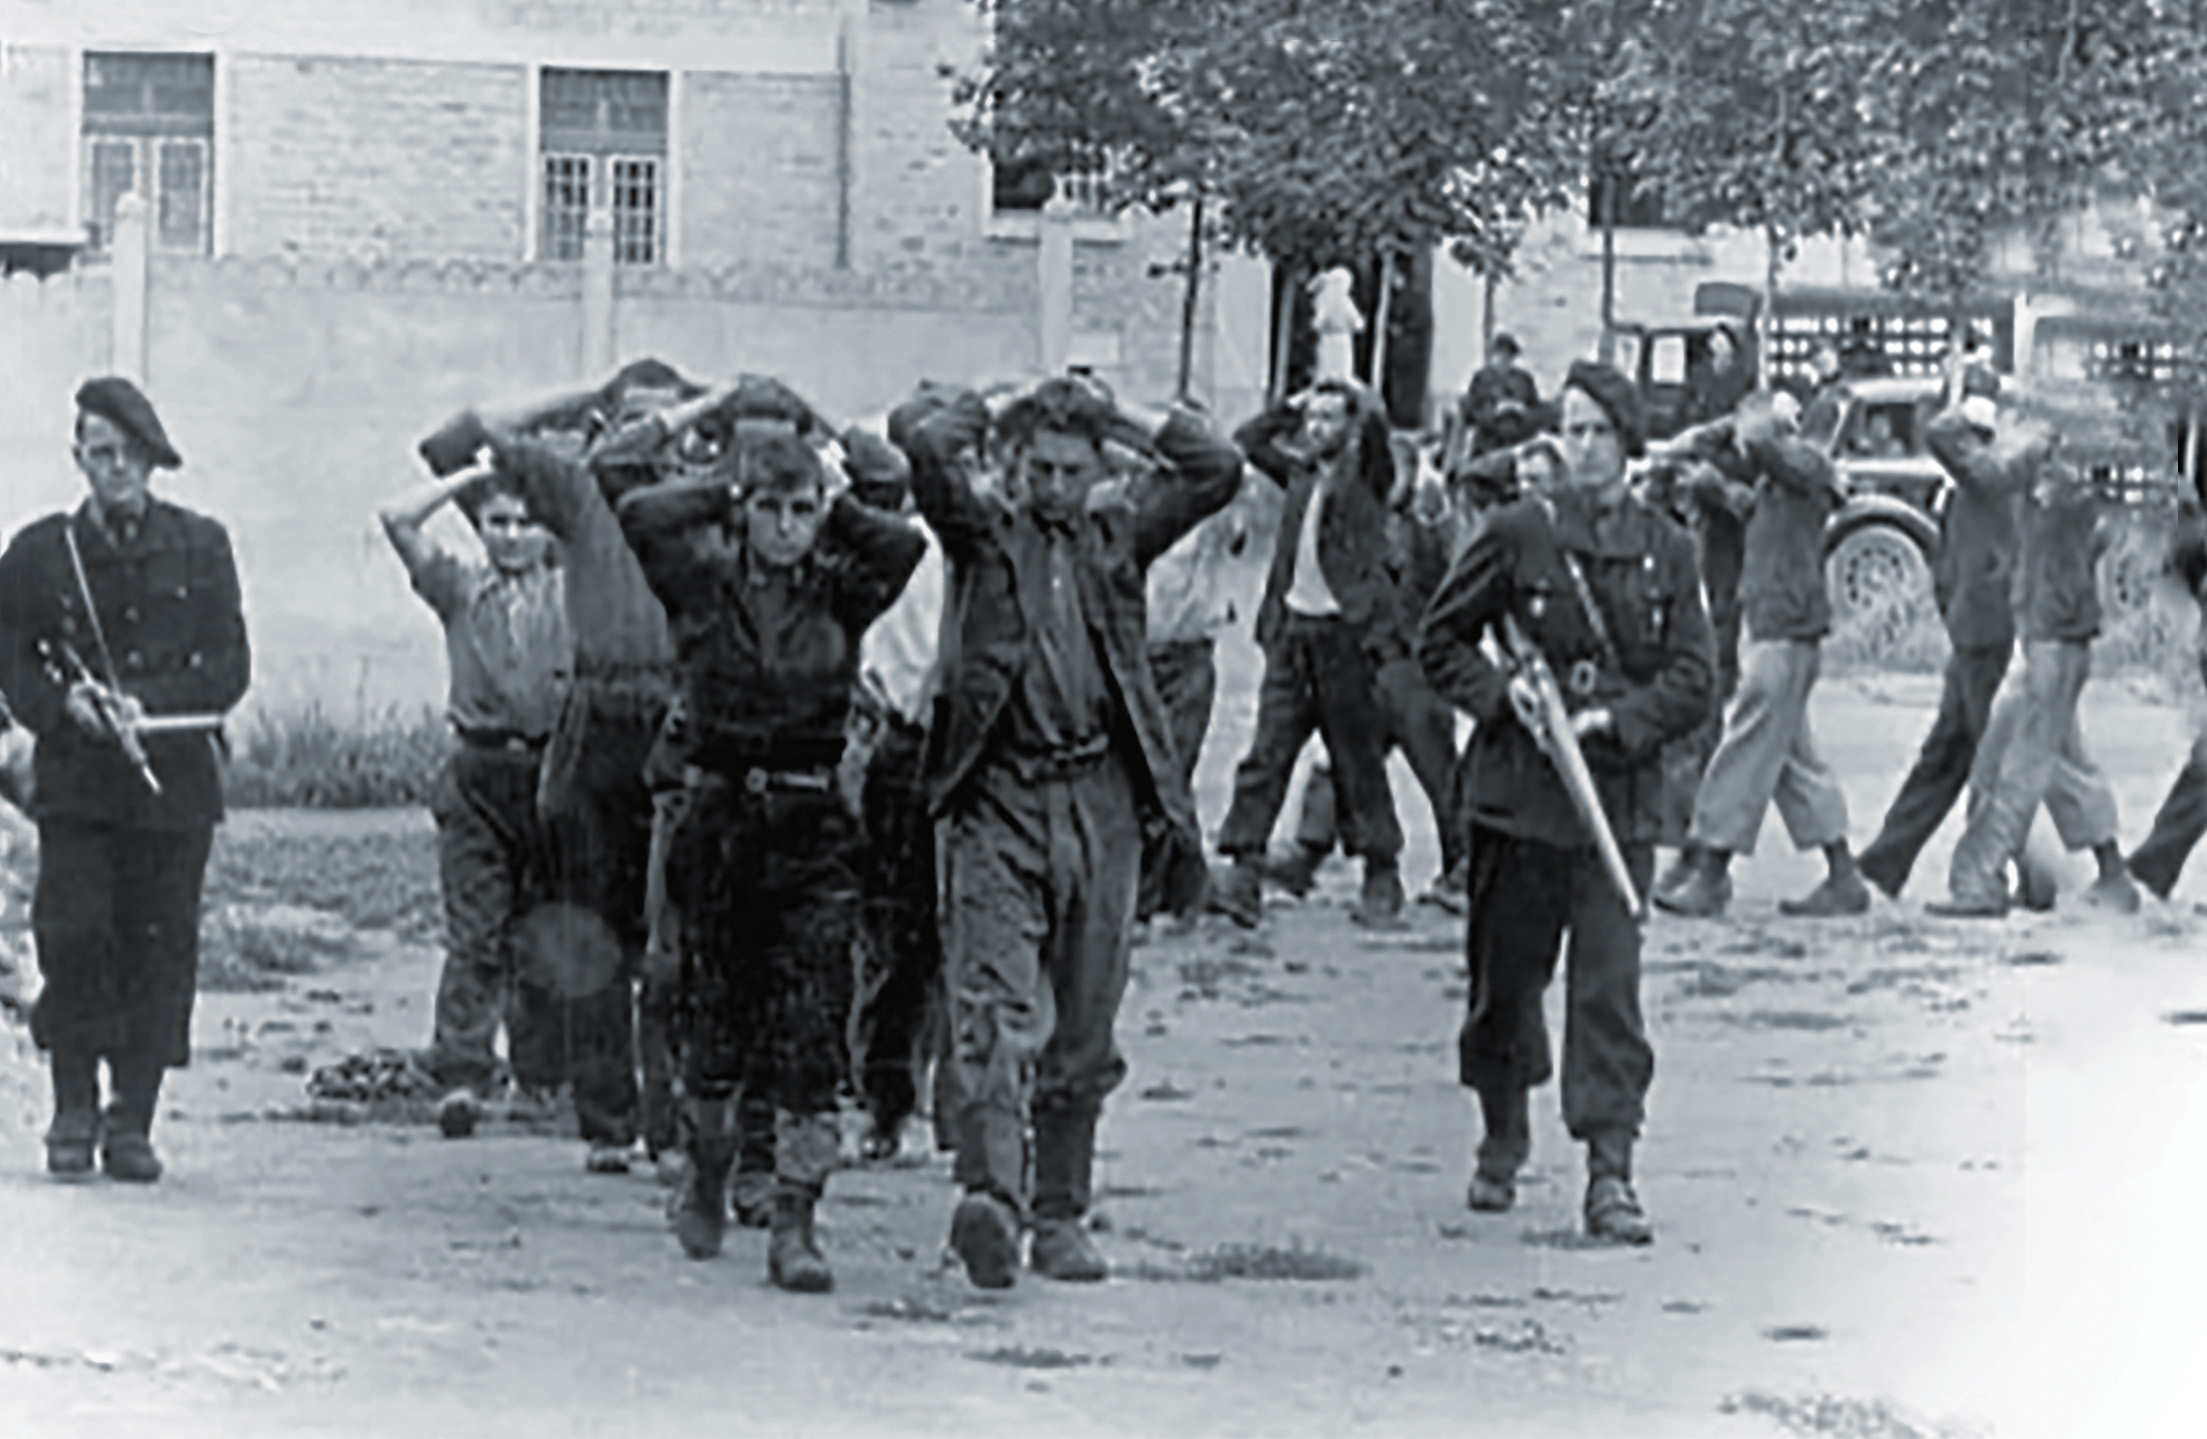 Did These Vichy Paramilitary Troops Suffer Reprisals After the War?